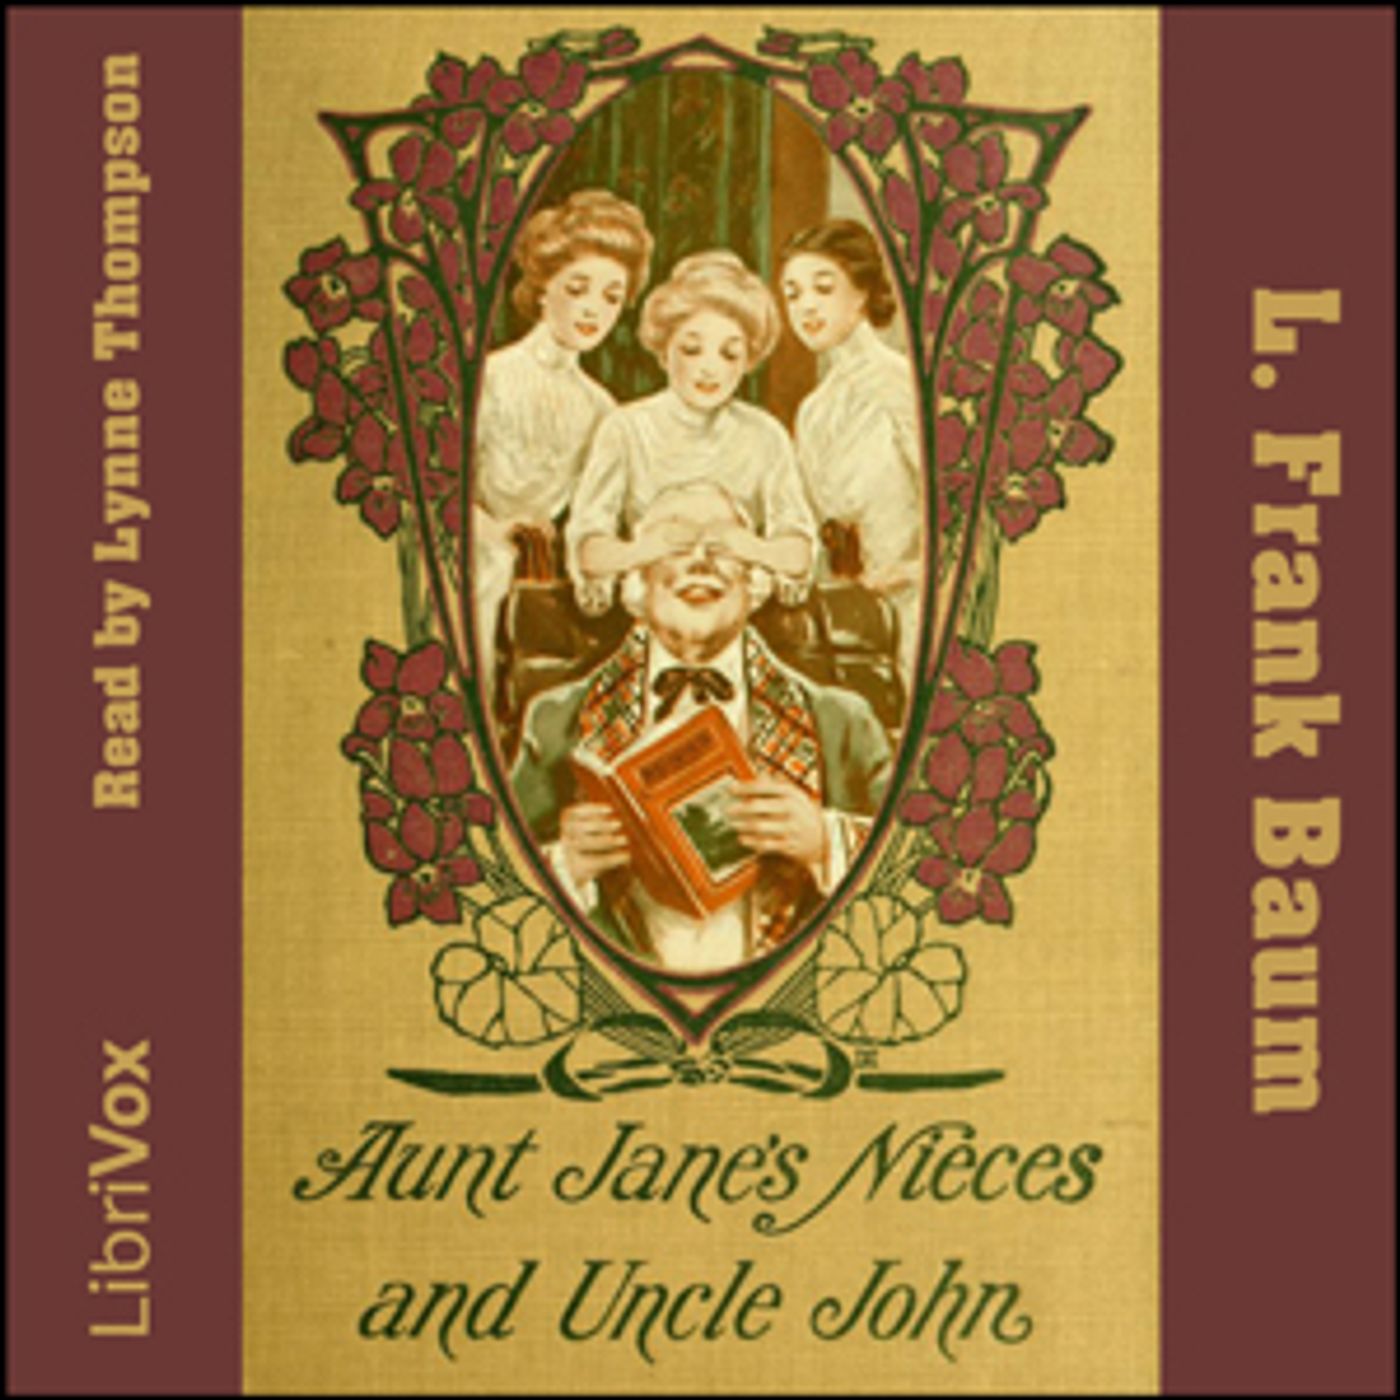 Aunt Jane’s Nieces And Uncle John by L. Frank Baum (1856 – 1919)